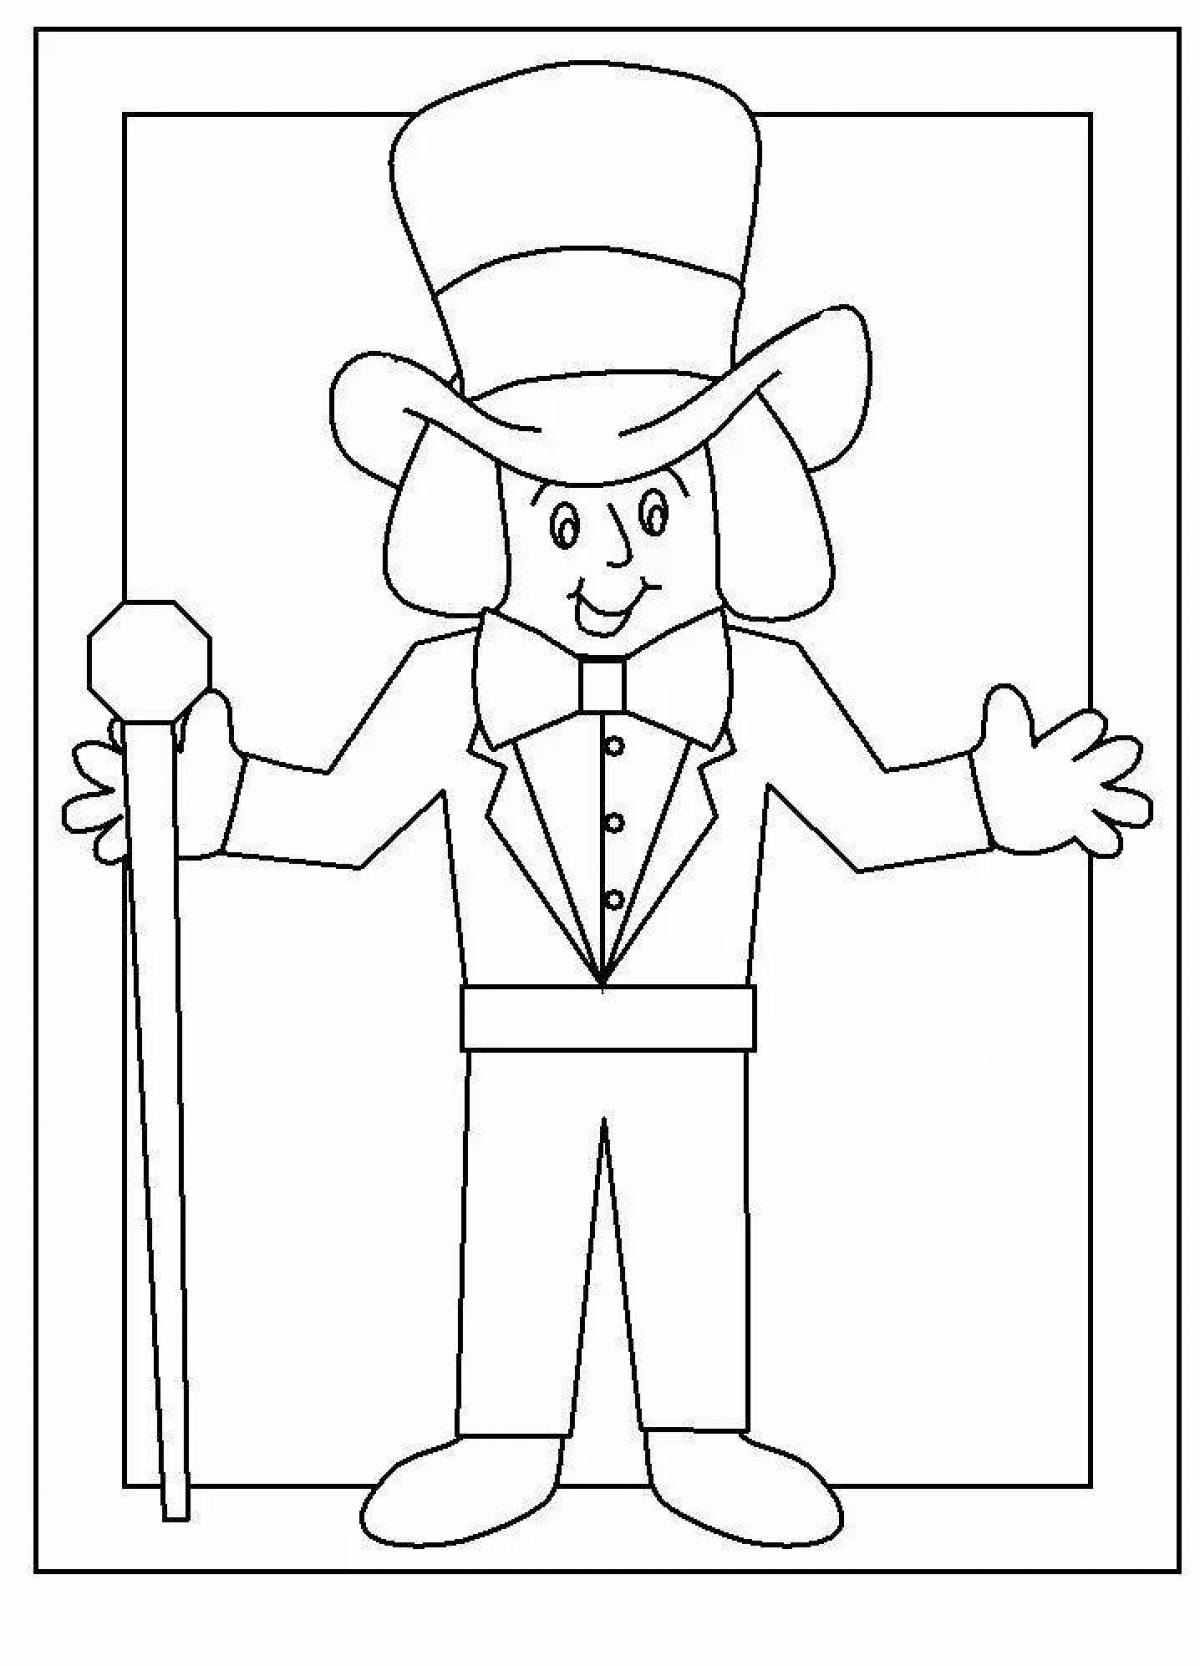 Willy wonka adorable coloring book